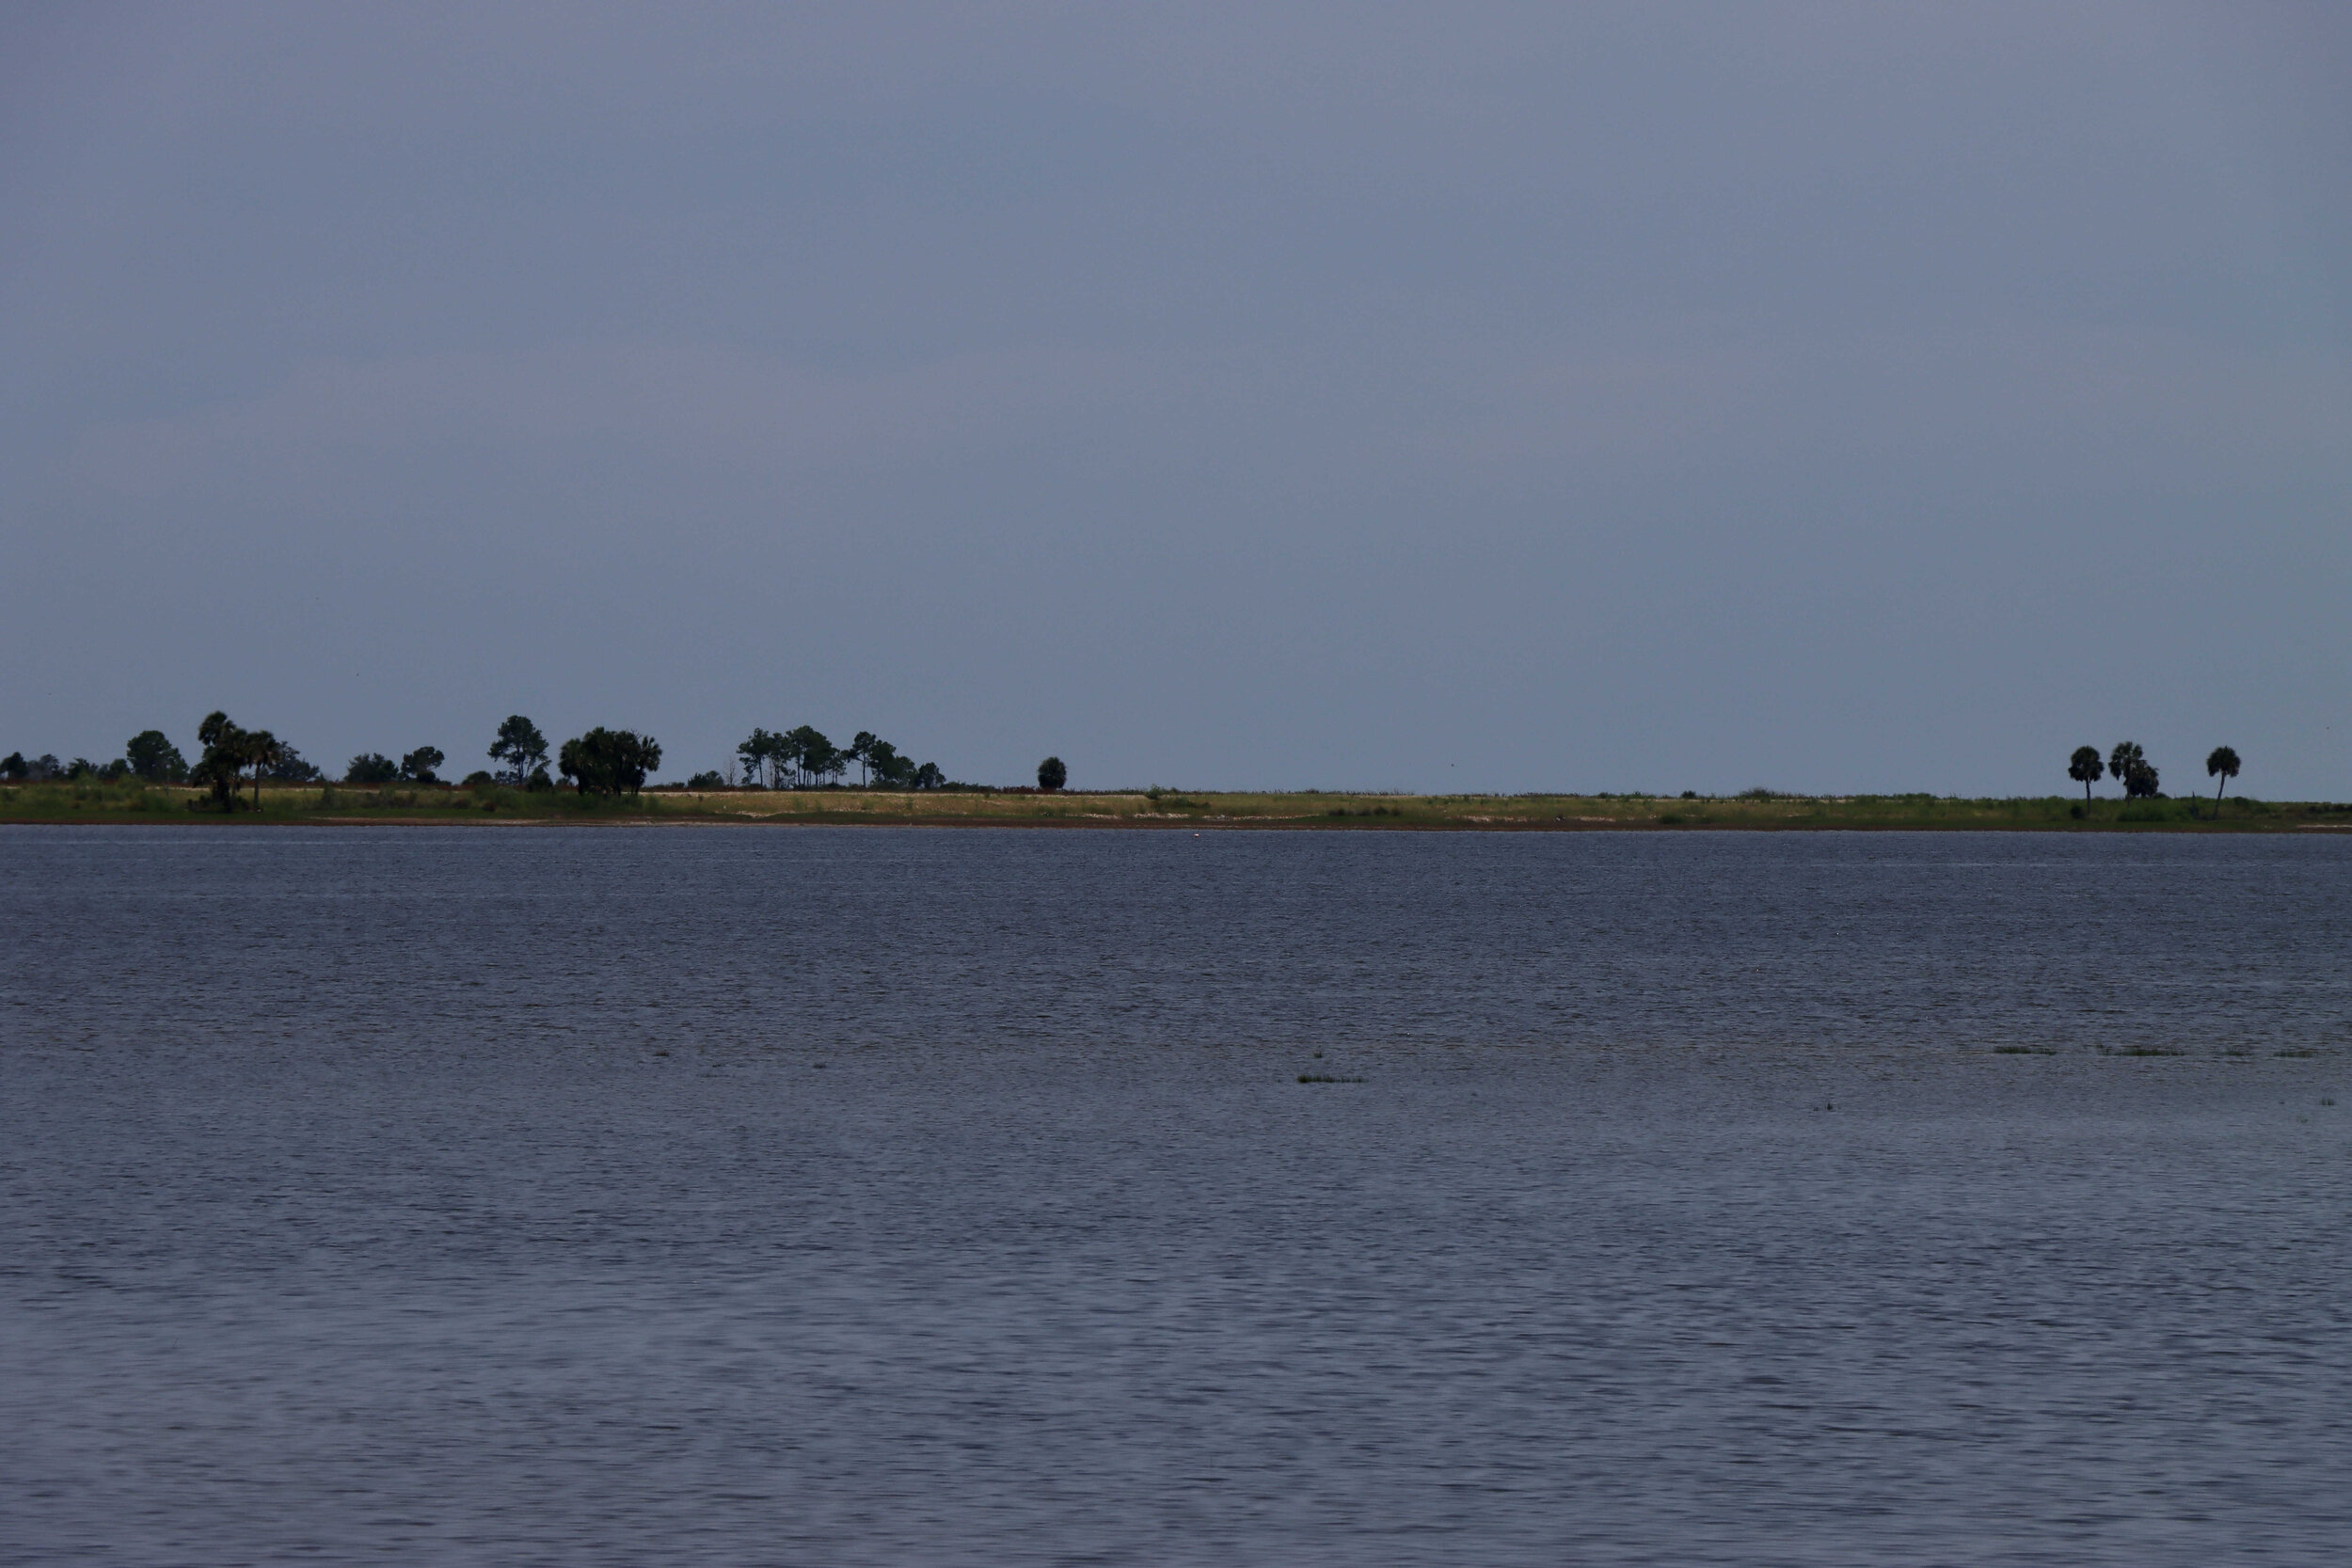  View of the saltwater marsh - there’s a tiny pink speck in the distance - that’s  Pinky the flamingo !  